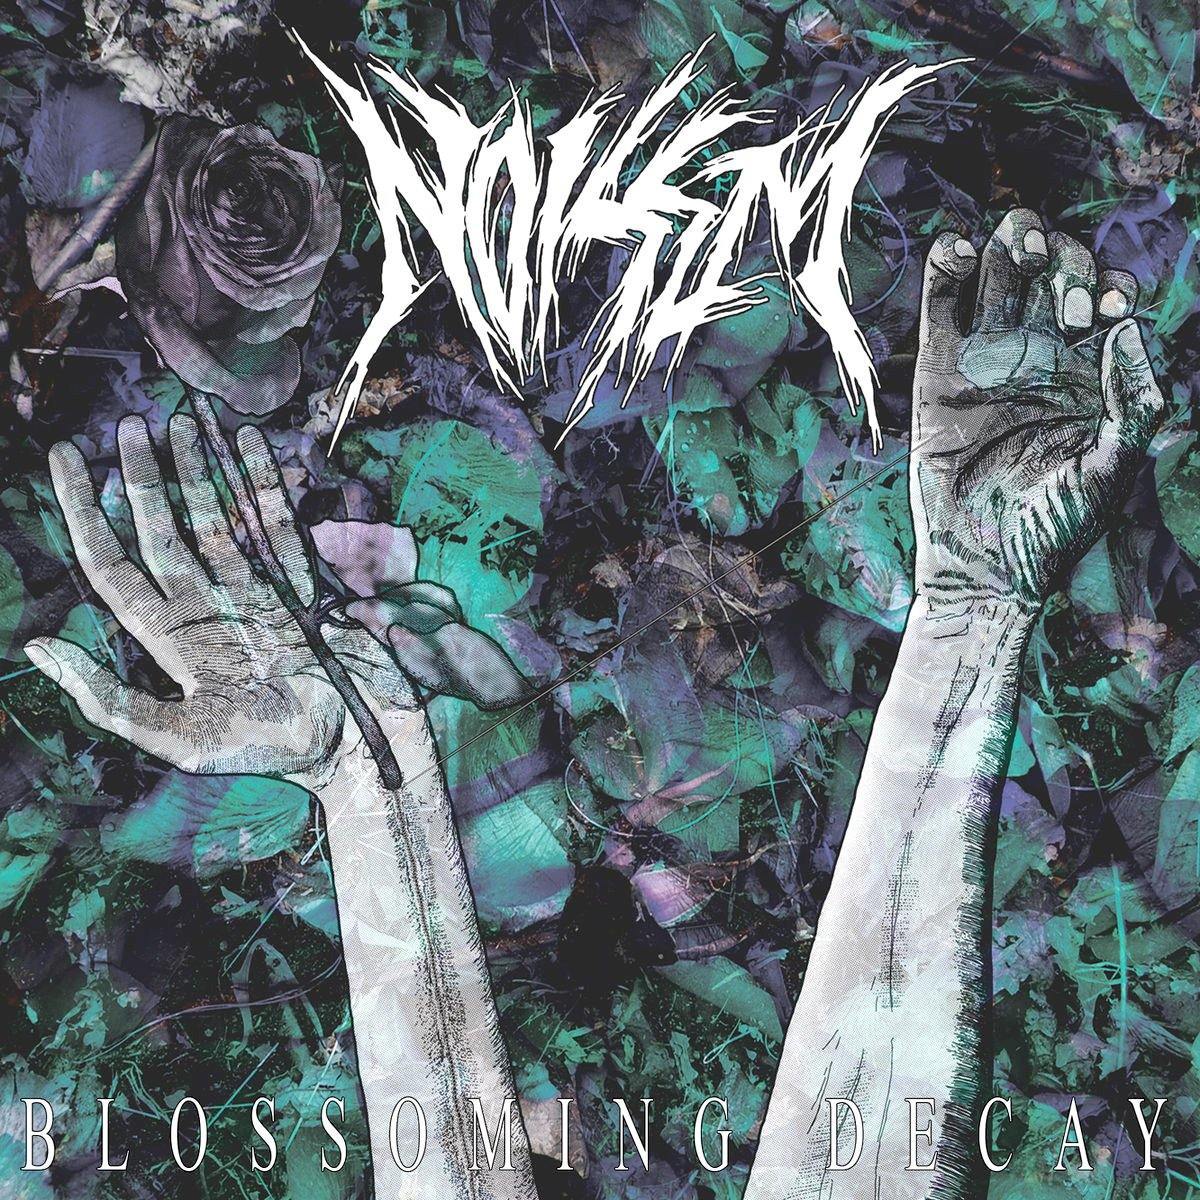 Buy – Noisem "Blossoming Decay" CD – Band & Music Merch – Cold Cuts Merch